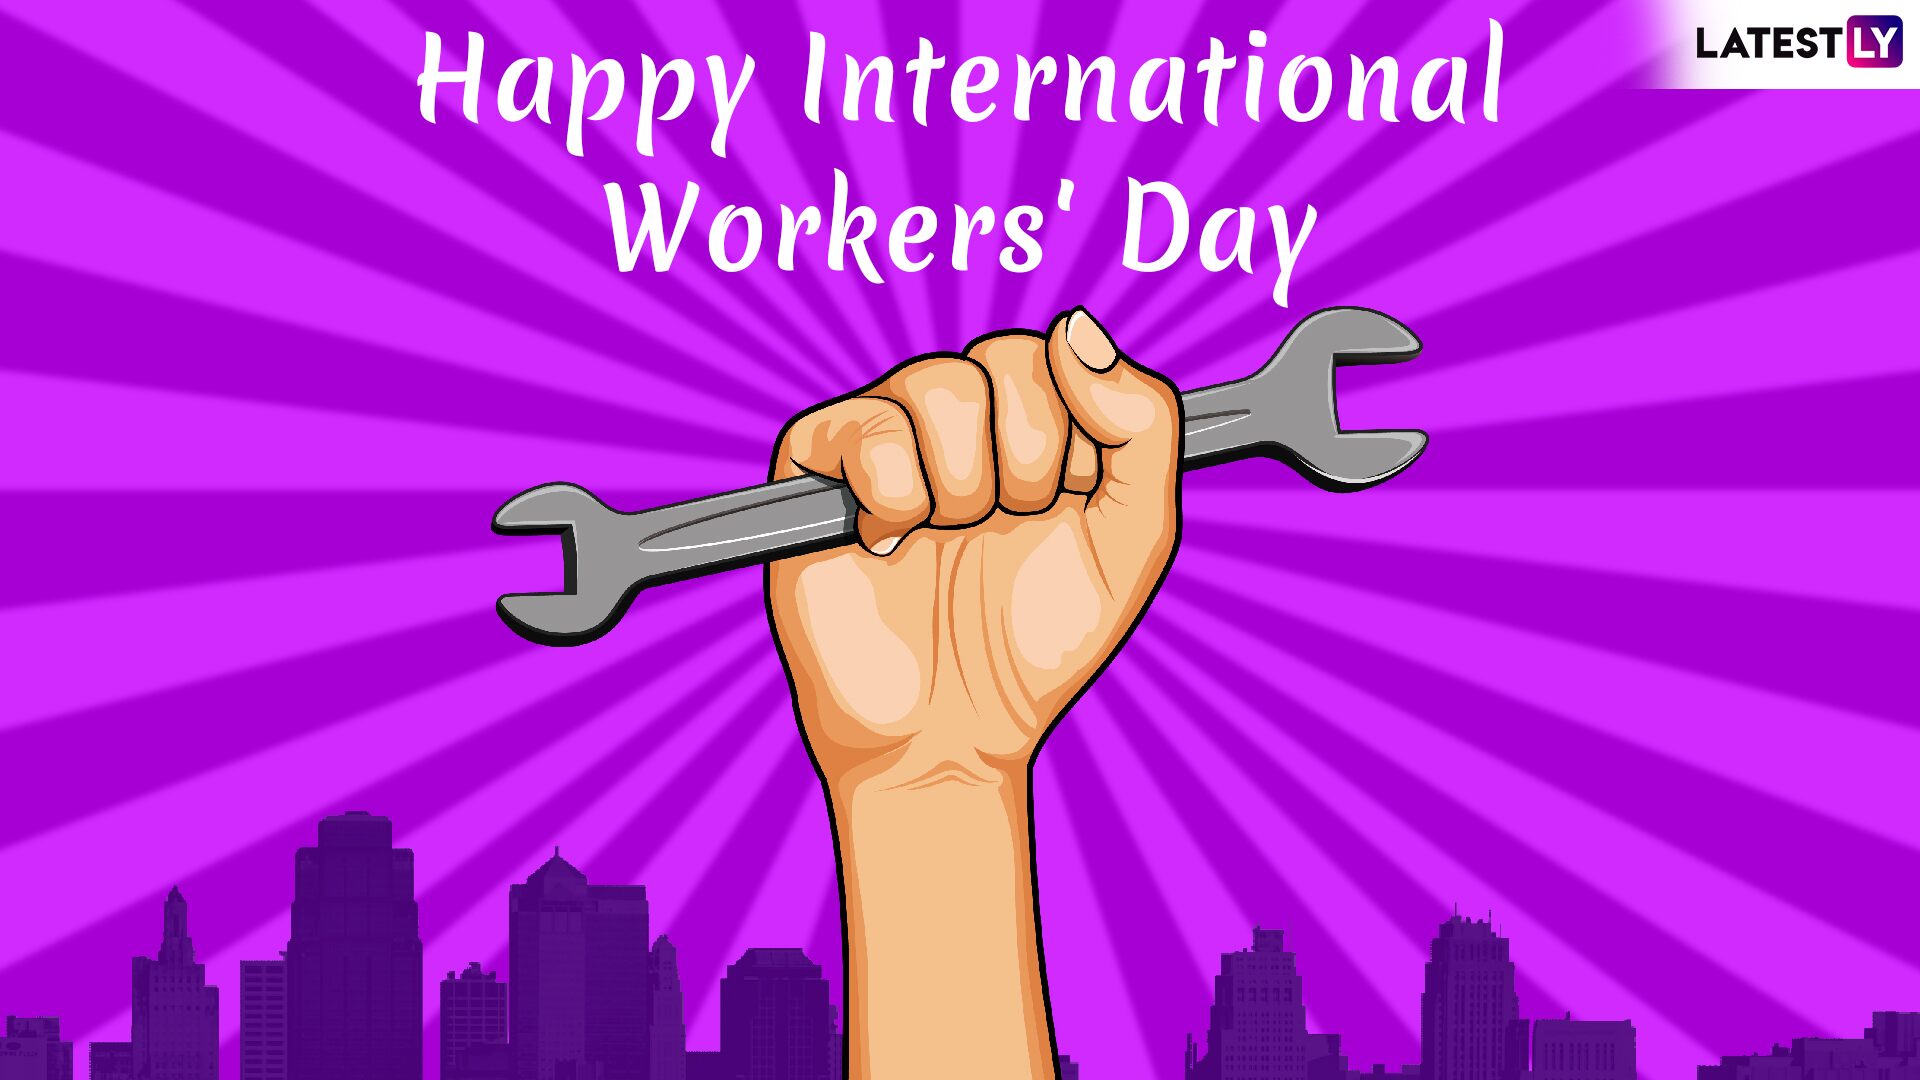 International Labour Day HD Image With Quotes For